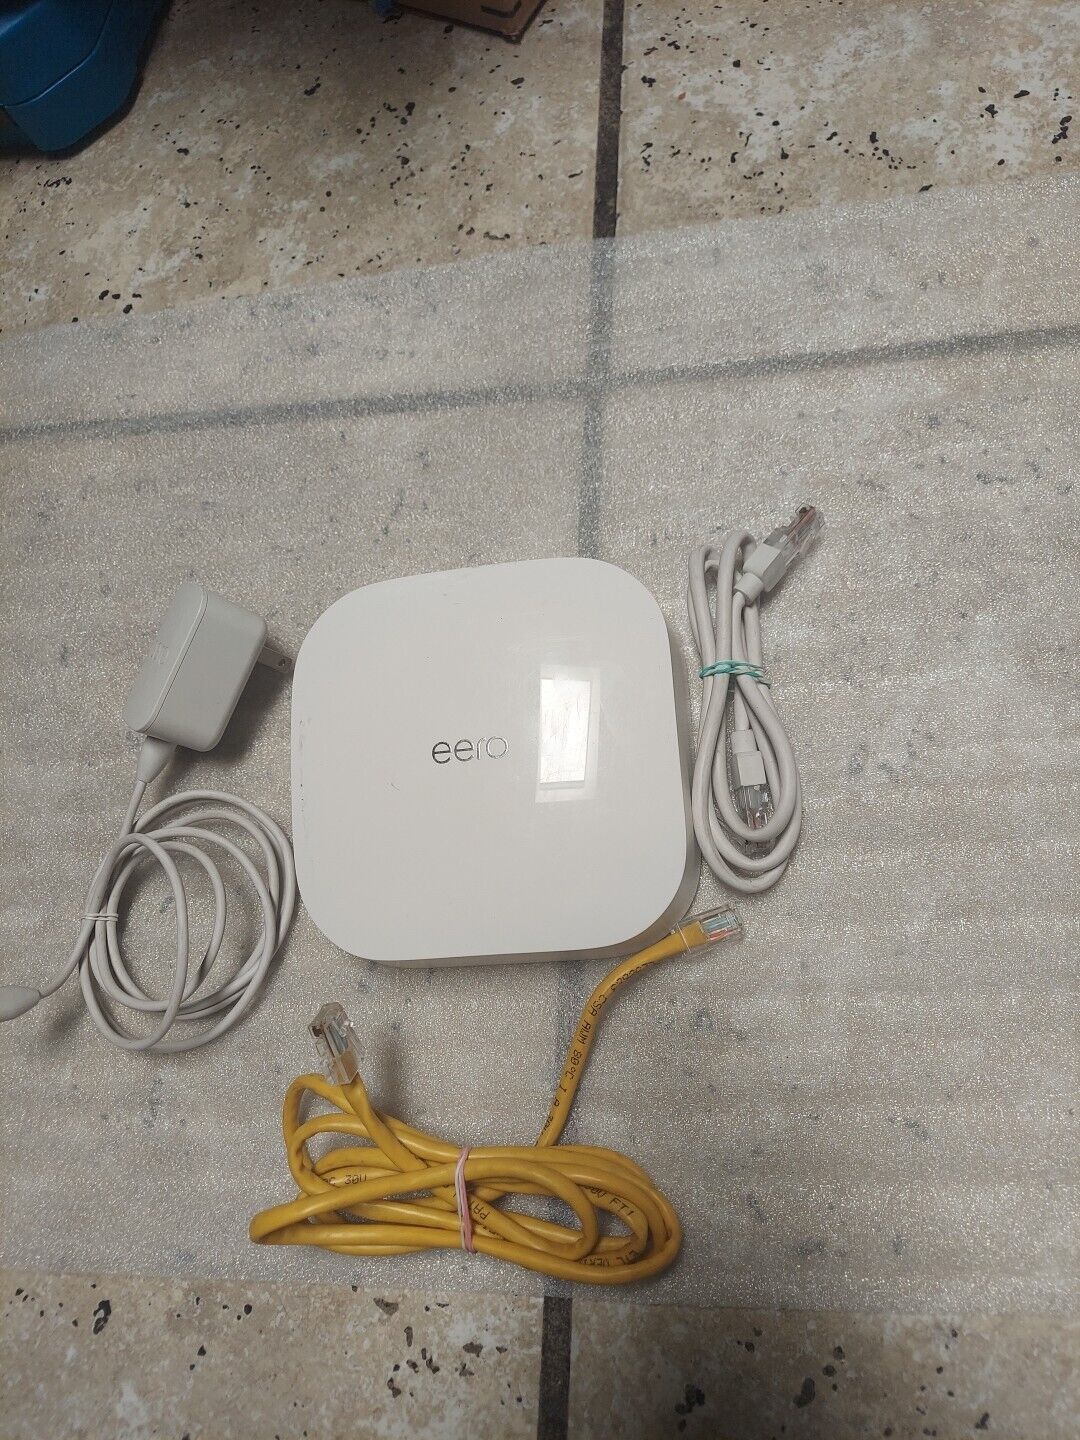 eero Pro 6 Tri-Band Mesh Wi-Fi 6 Router K010001 (No Power Cord) USED